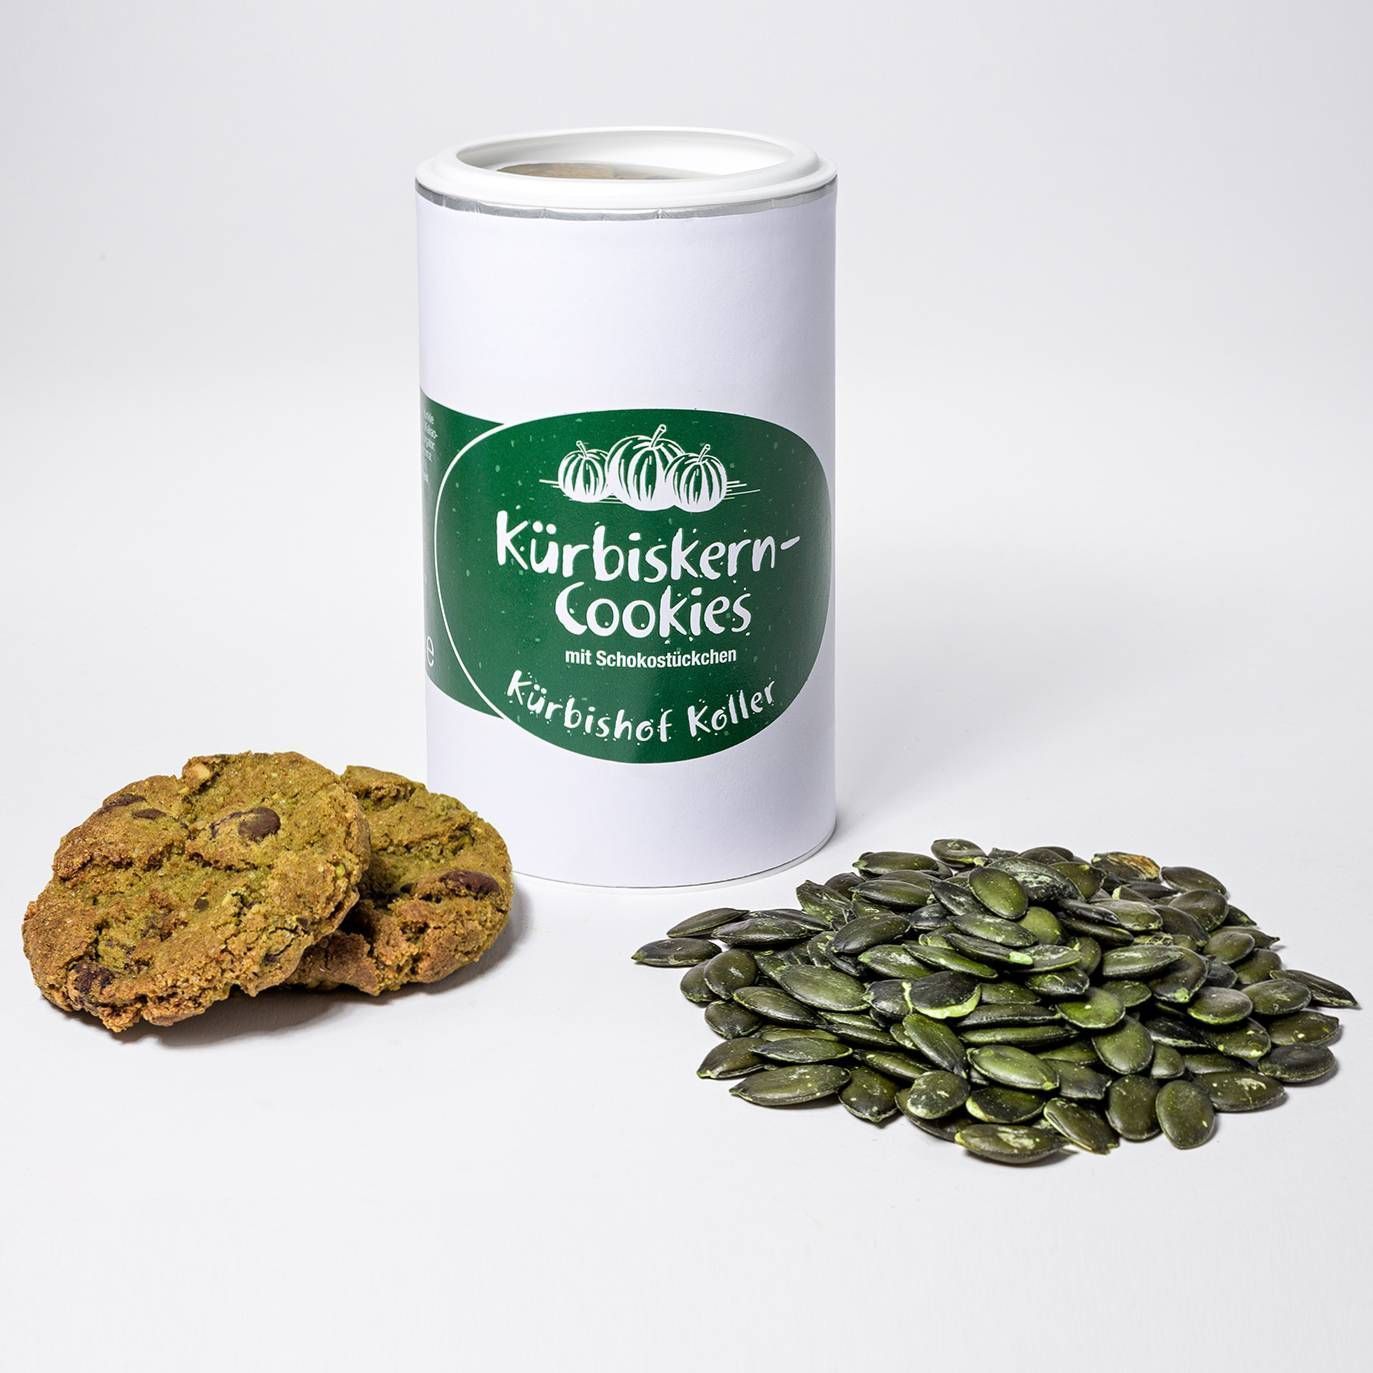 Pumpkin Seed Cookies with Chocolate Chips in Canada